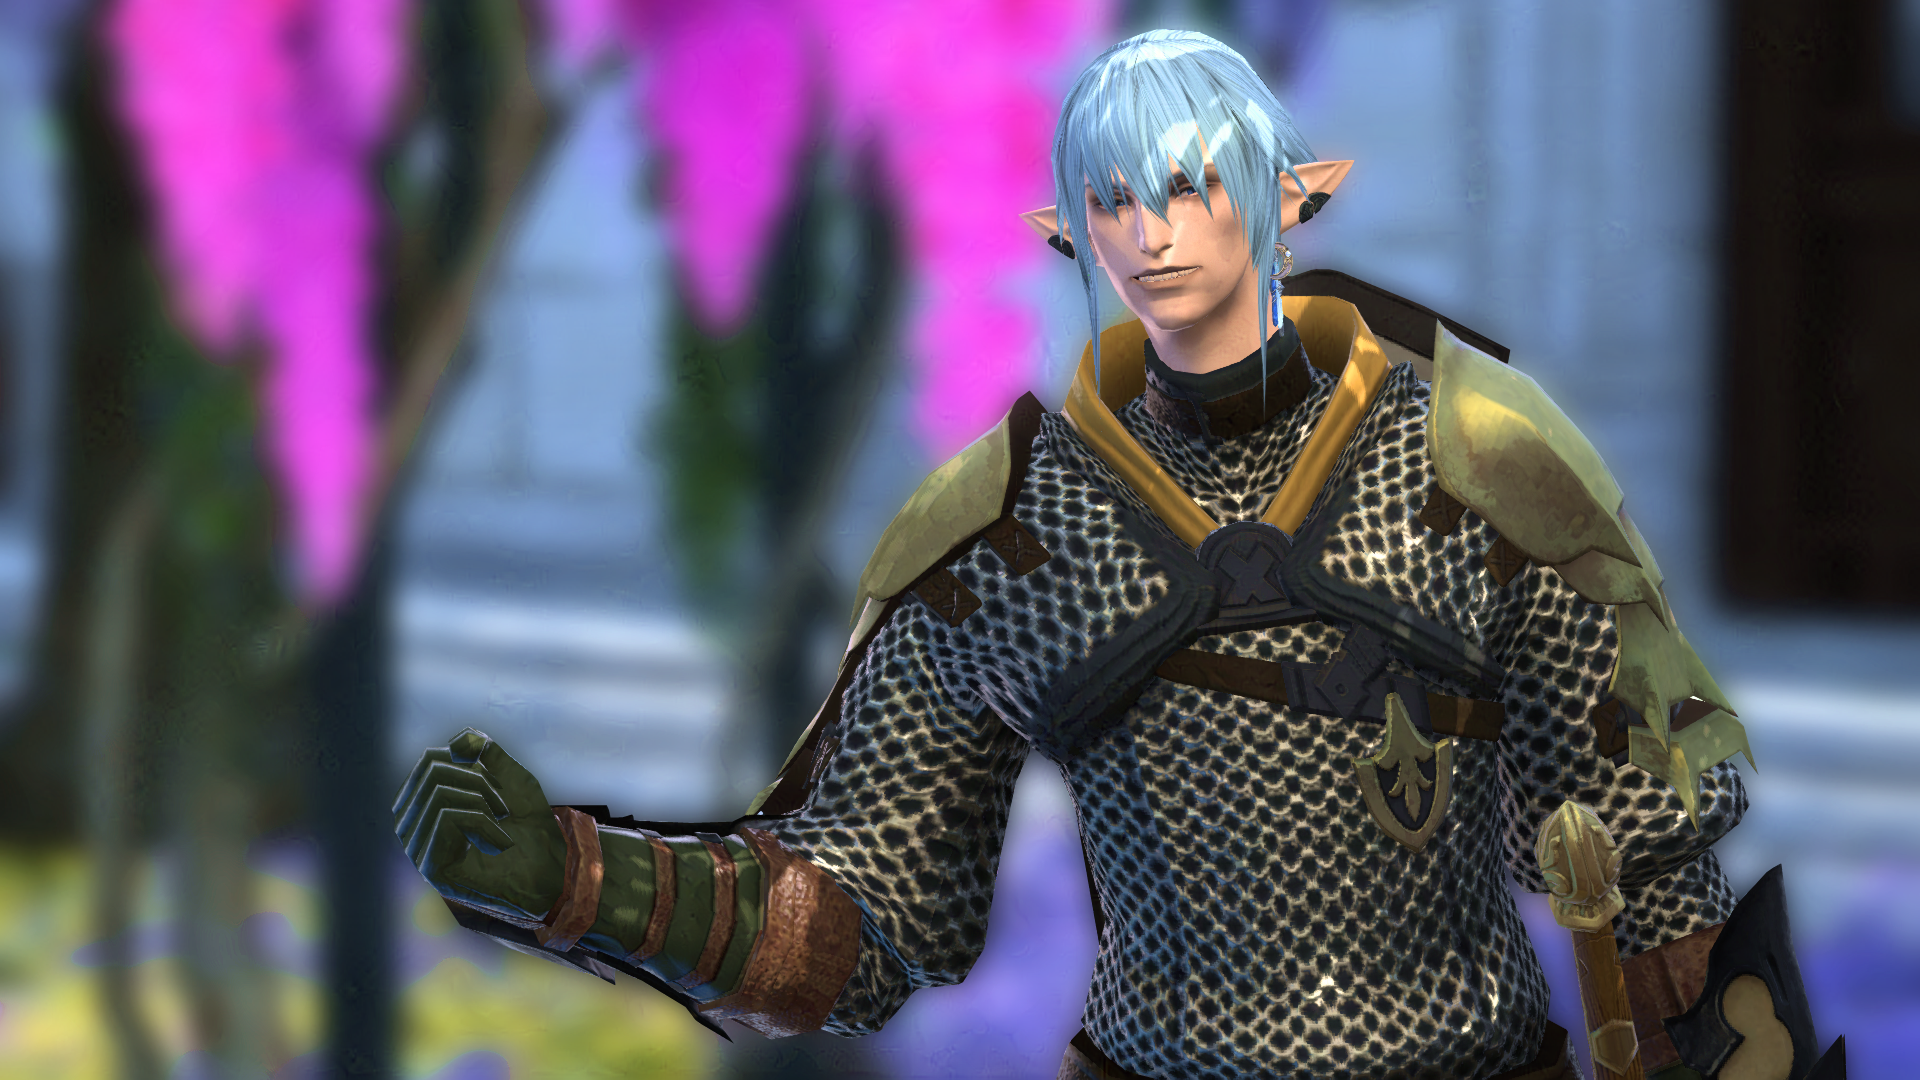 Haurchefant de Fortemps - an Elezen of Ishgardian descent, looking at the viewer with a smile as he makes a joyous gesture.